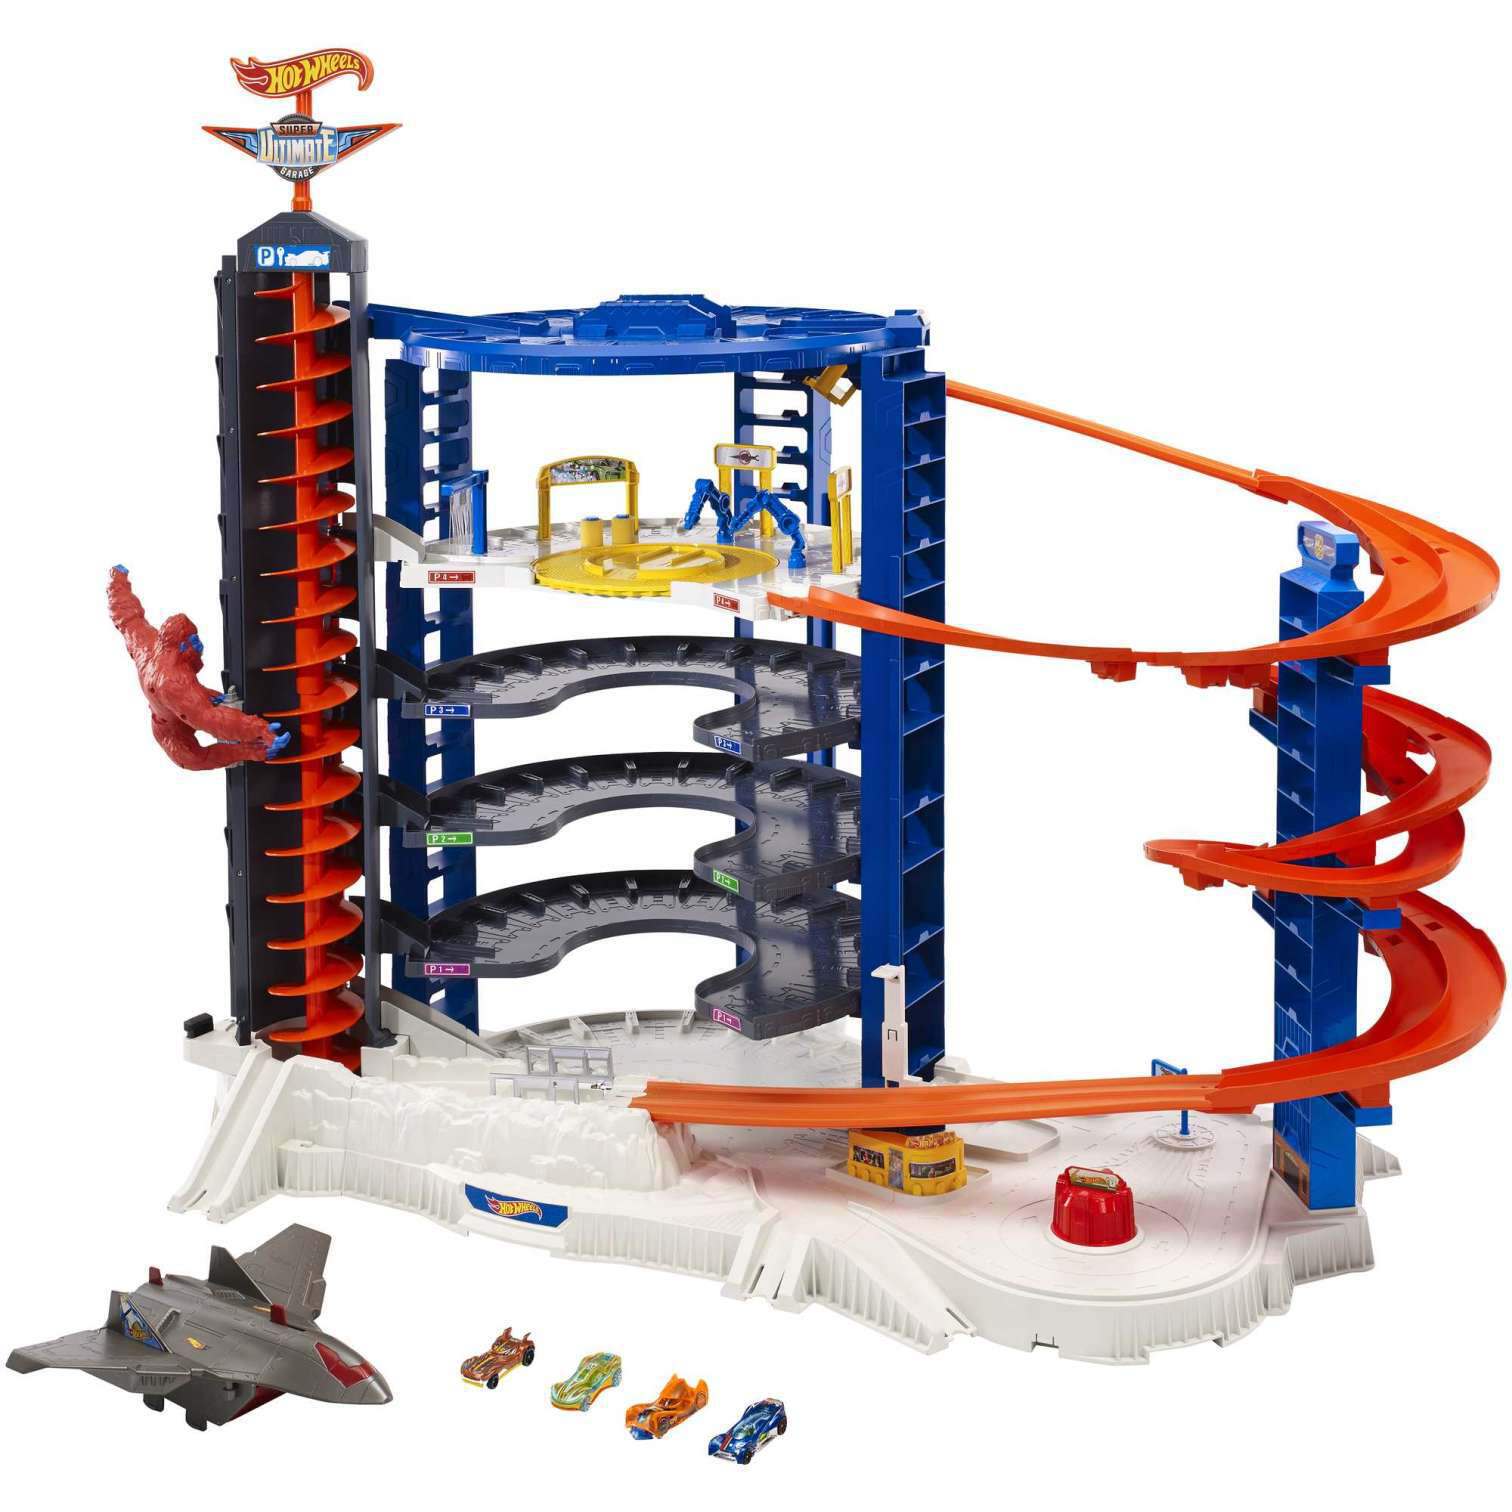 Hot Wheels Track Set with 4 1:64 Scale Toy Cars, Super Ultimate Garage, Over 3-Feet Tall - image 5 of 8